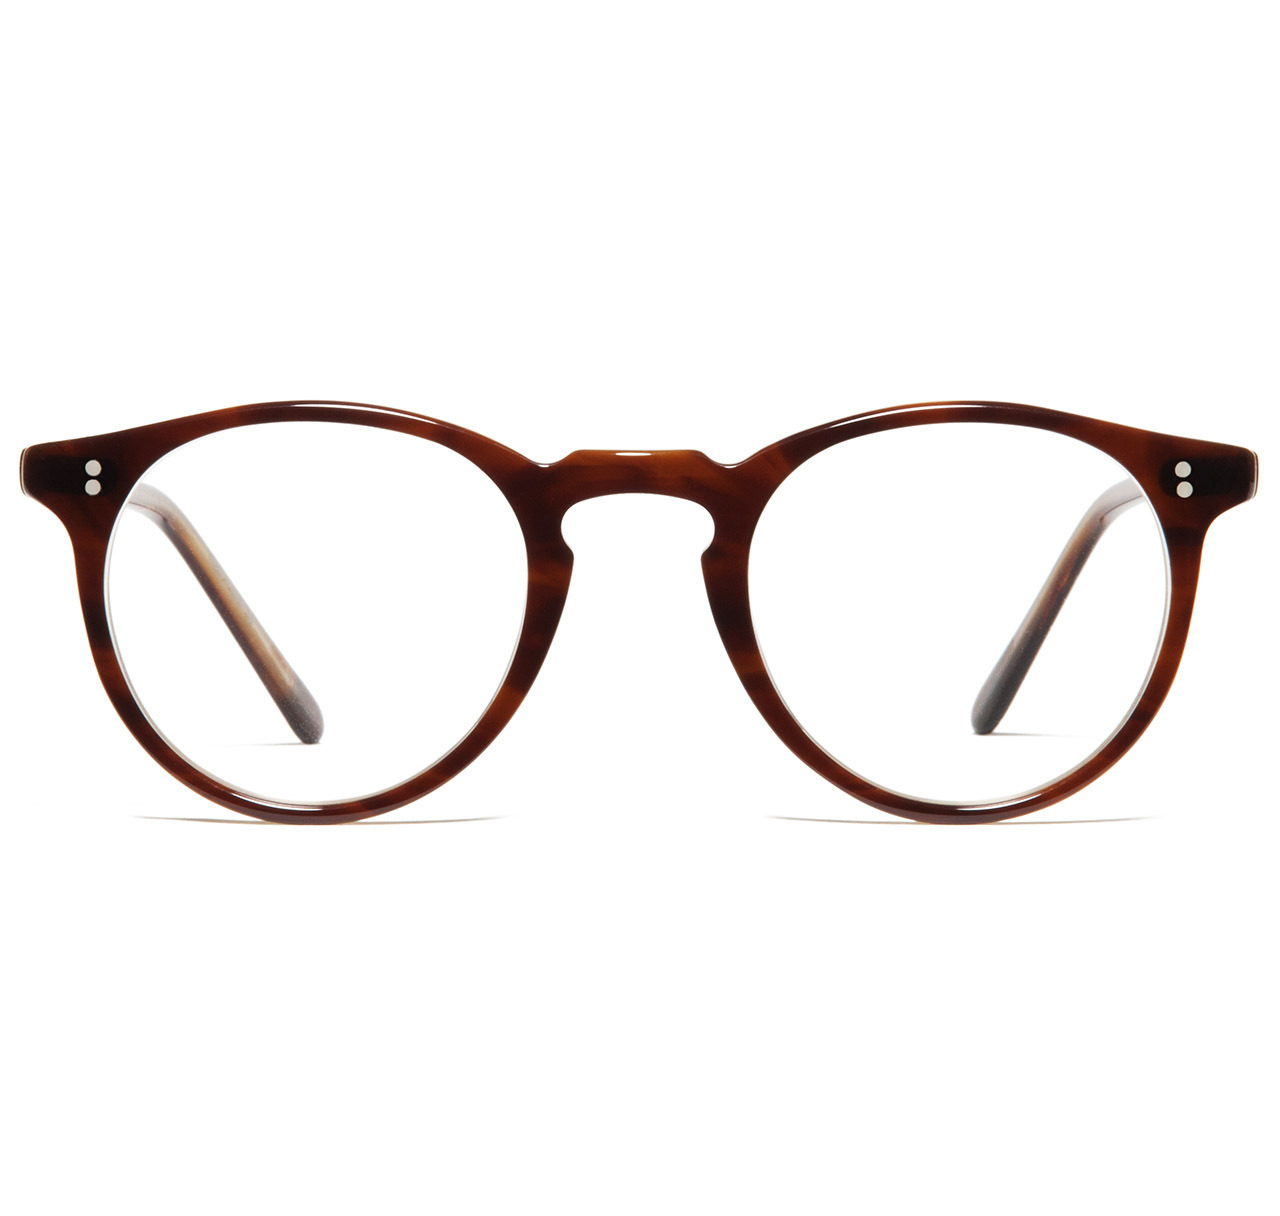 p3 keyhole glasses frams review buying guide